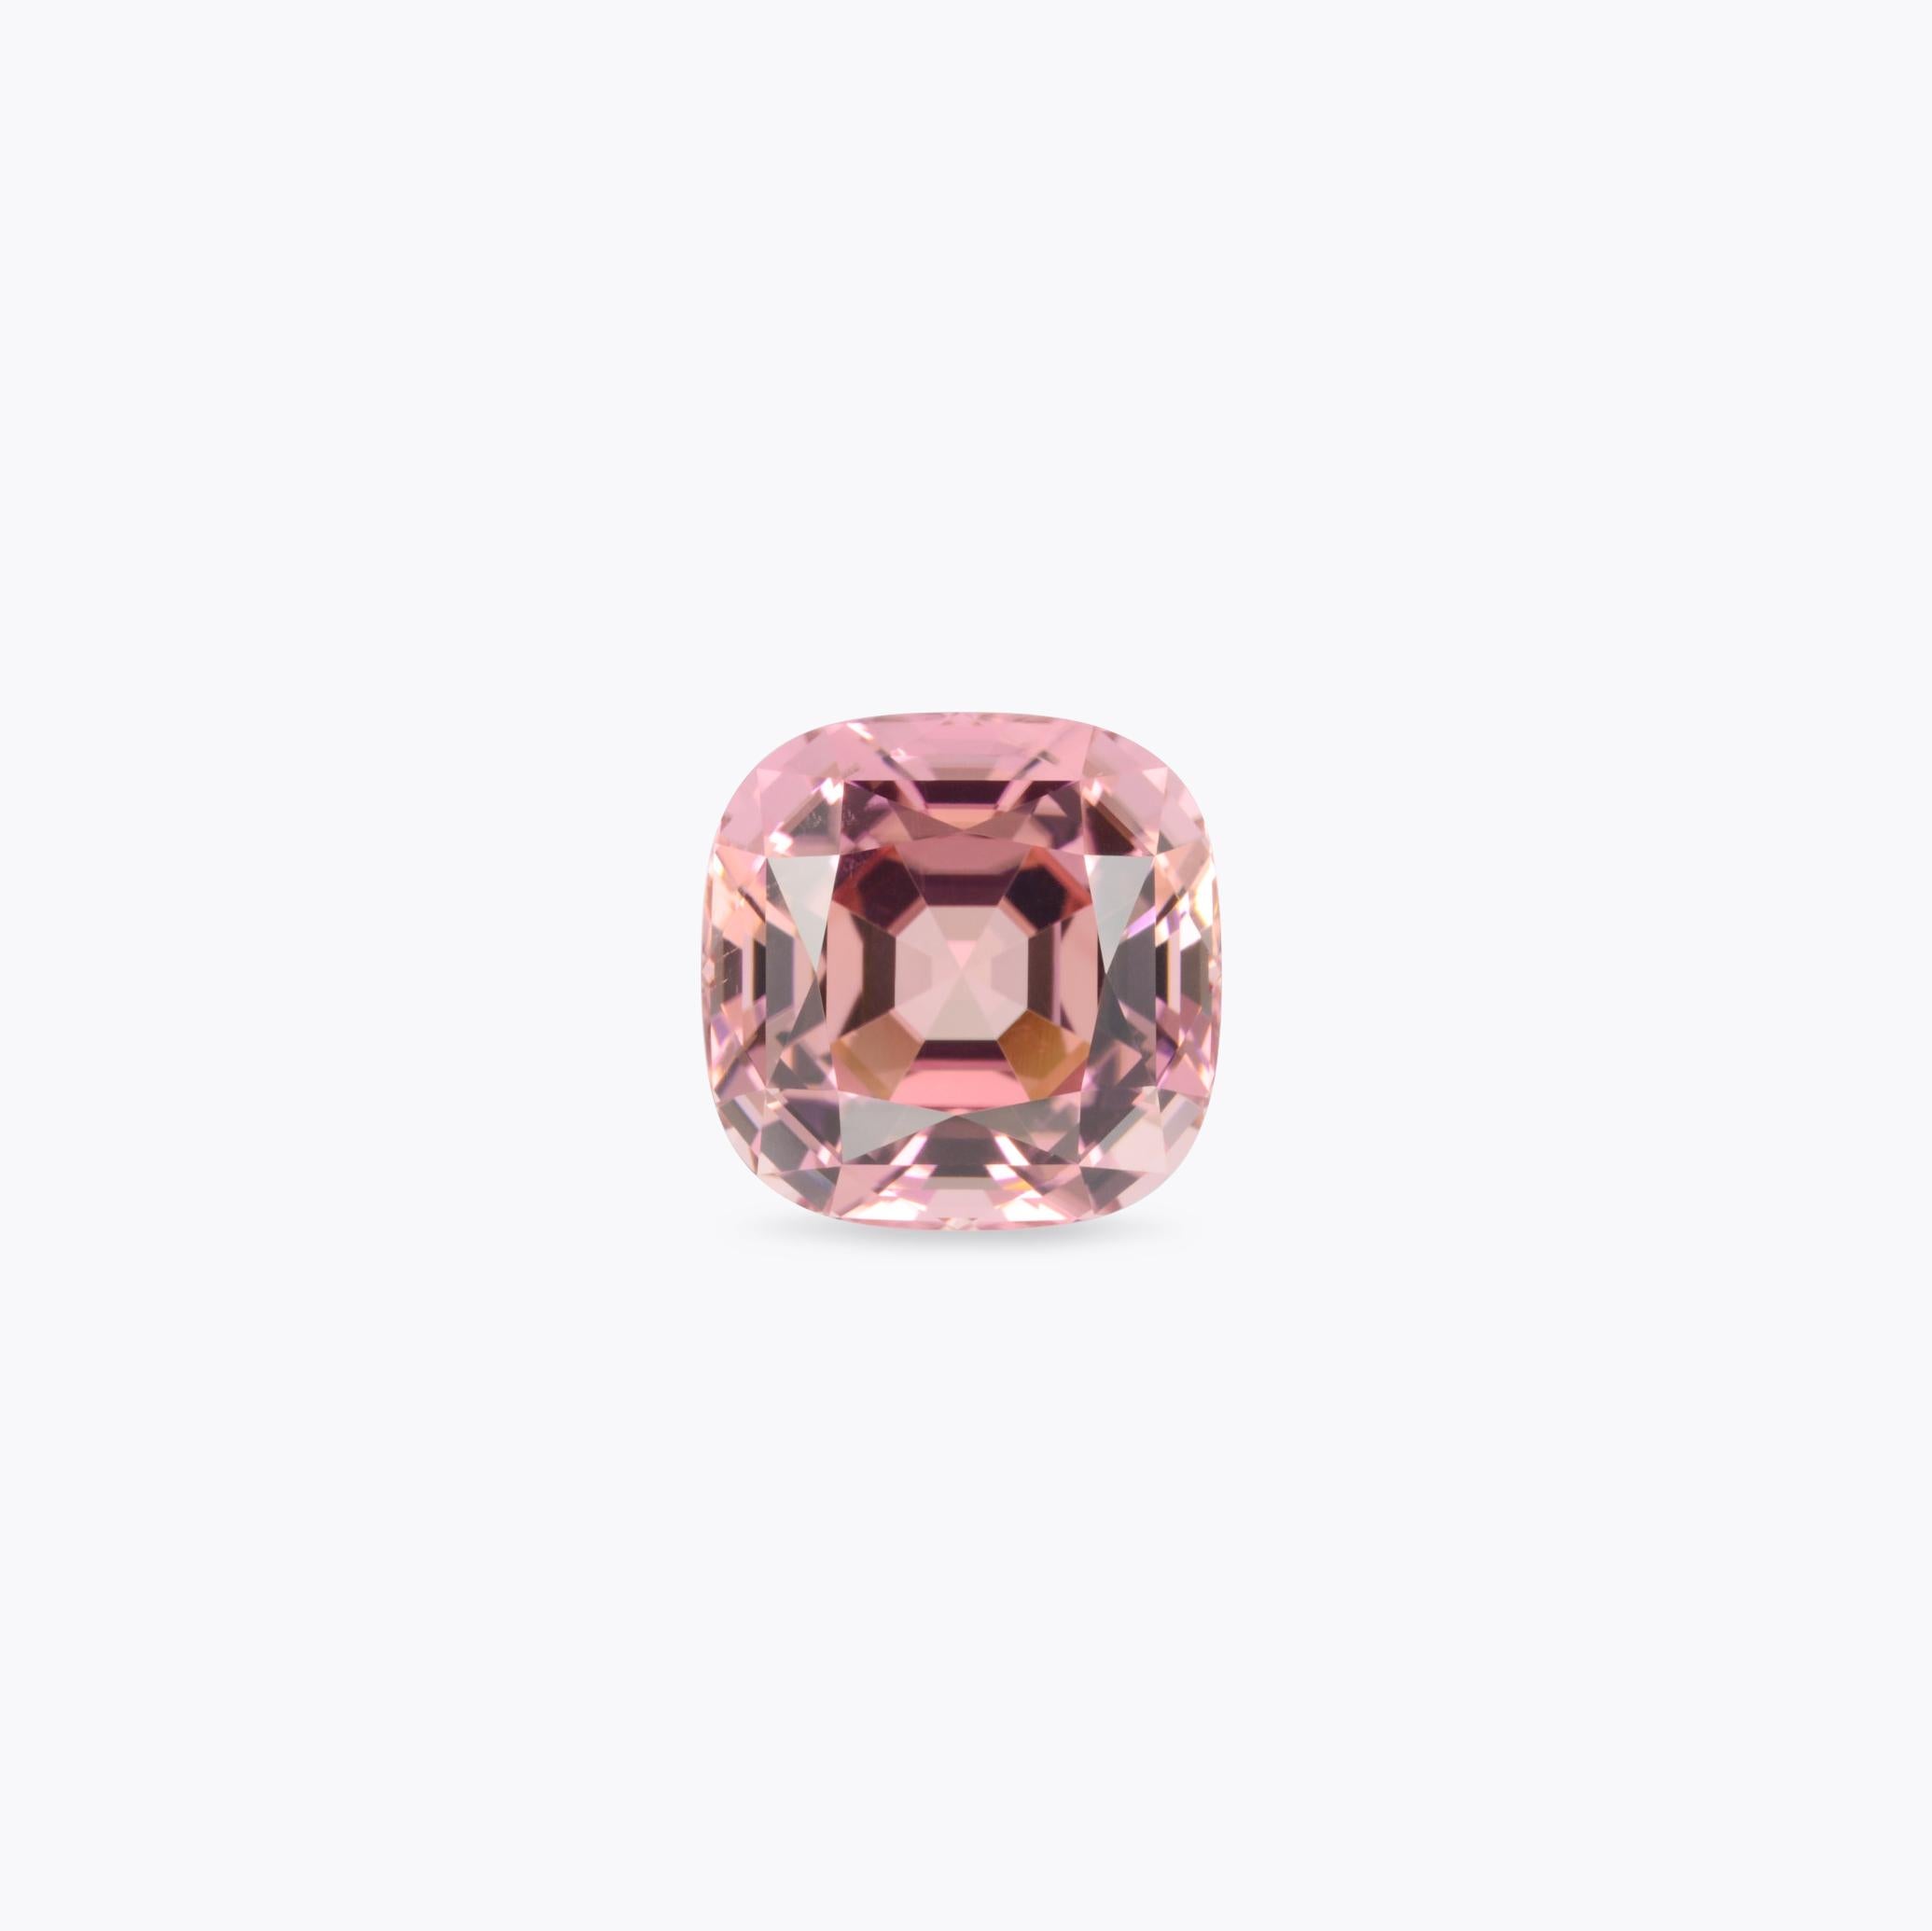 Marvelous 13.06 carat Pink Tourmaline square cushion gem, offered loose to a fine gemstone lover.
Dimensions: 13.70 x 13.70 x 10.40 mm
Returns are accepted and paid by us within 7 days of delivery.
We offer supreme custom jewelry work upon request.